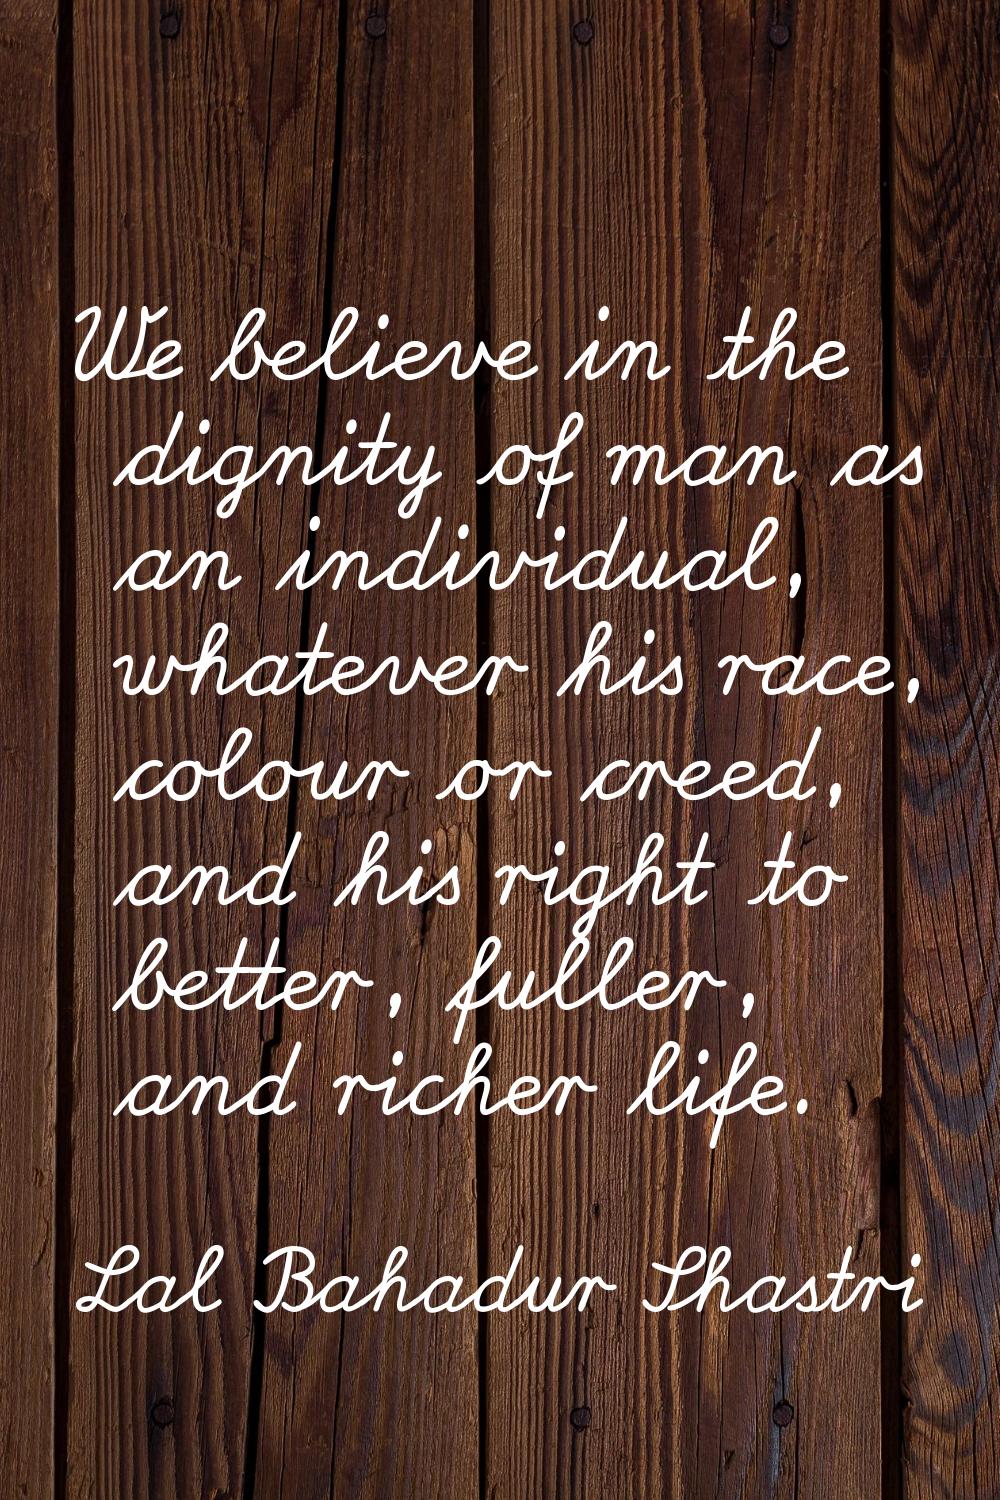 We believe in the dignity of man as an individual, whatever his race, colour or creed, and his righ